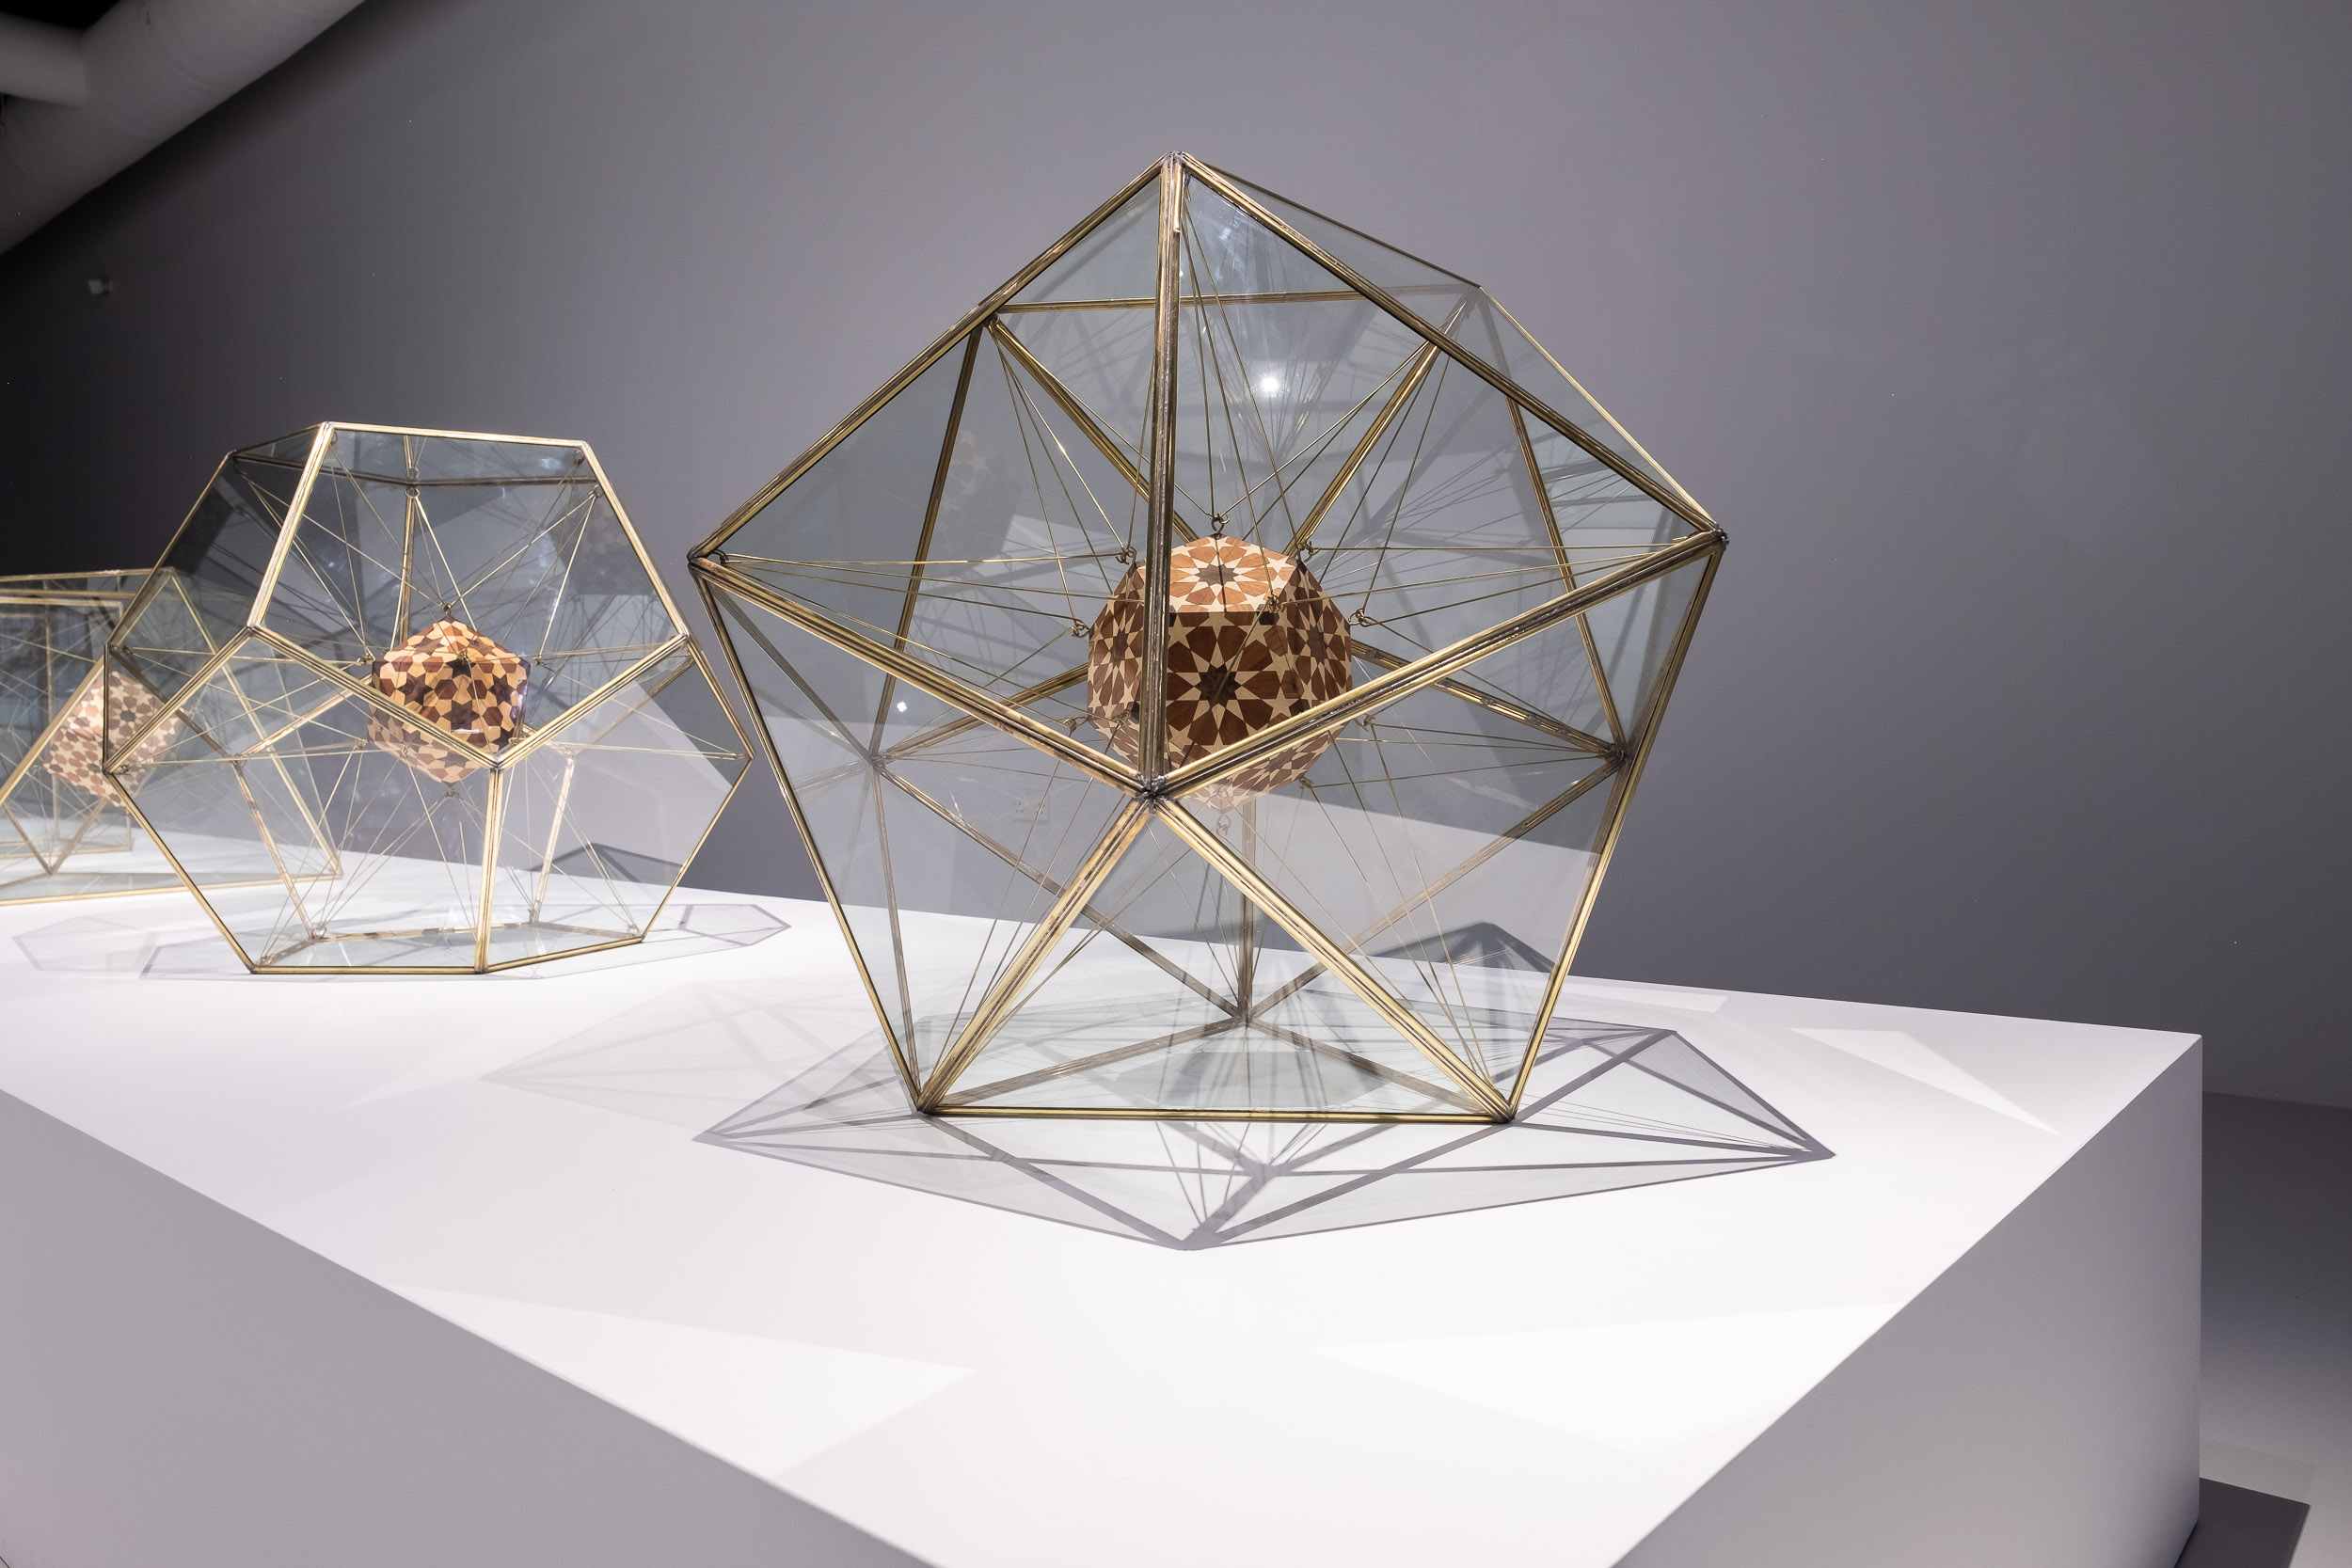 Installation shot of The Platonic Solid Duals series, 2019, Wood, copper and brass, 121 x 100.2 x 100.2 cm each. Image courtesy of Maraya Art Centre.